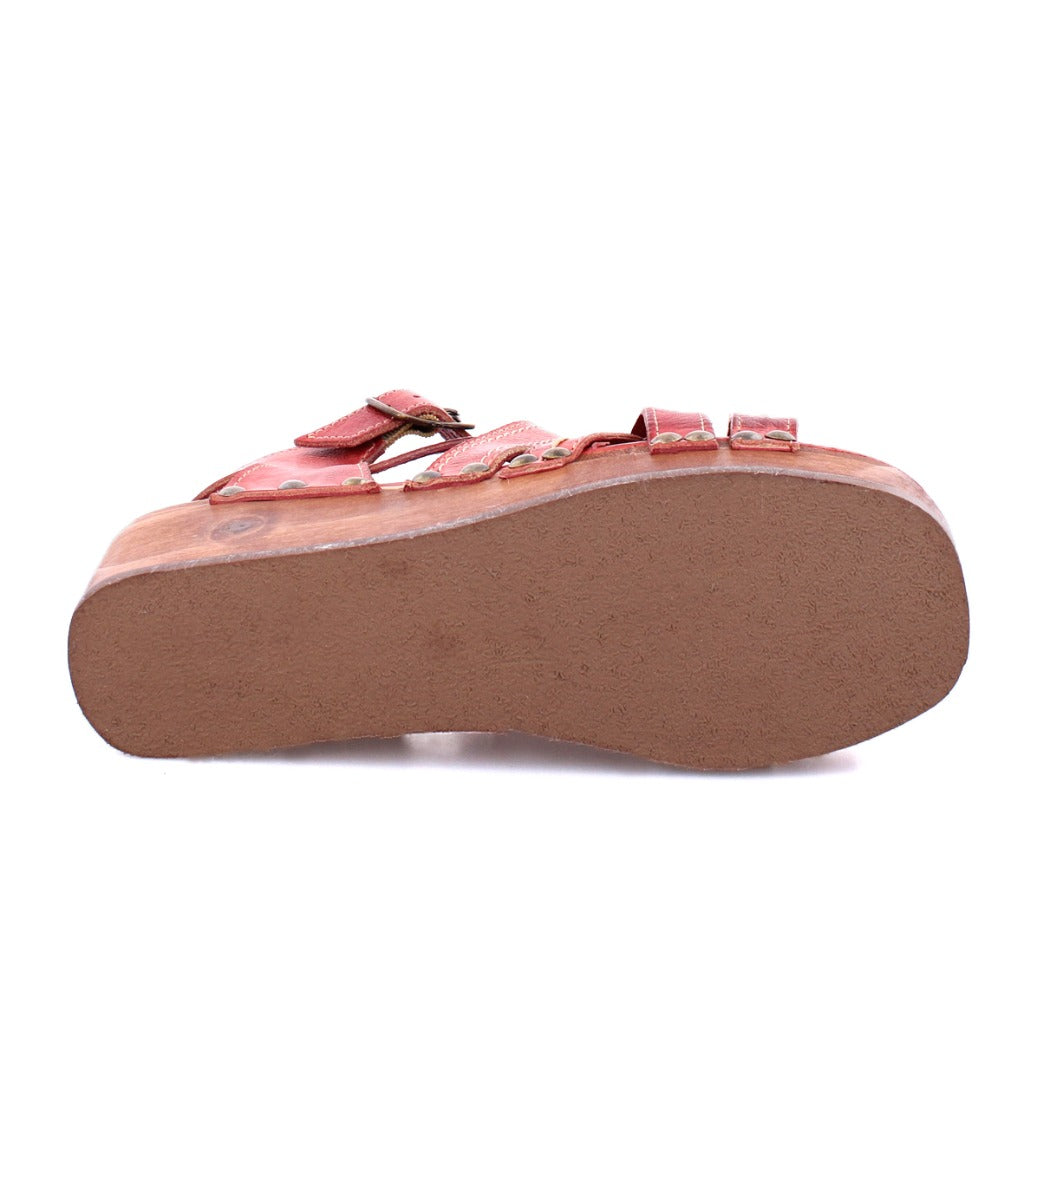 A pair of Bed Stu Shirley women's sandals with two straps on the sole.